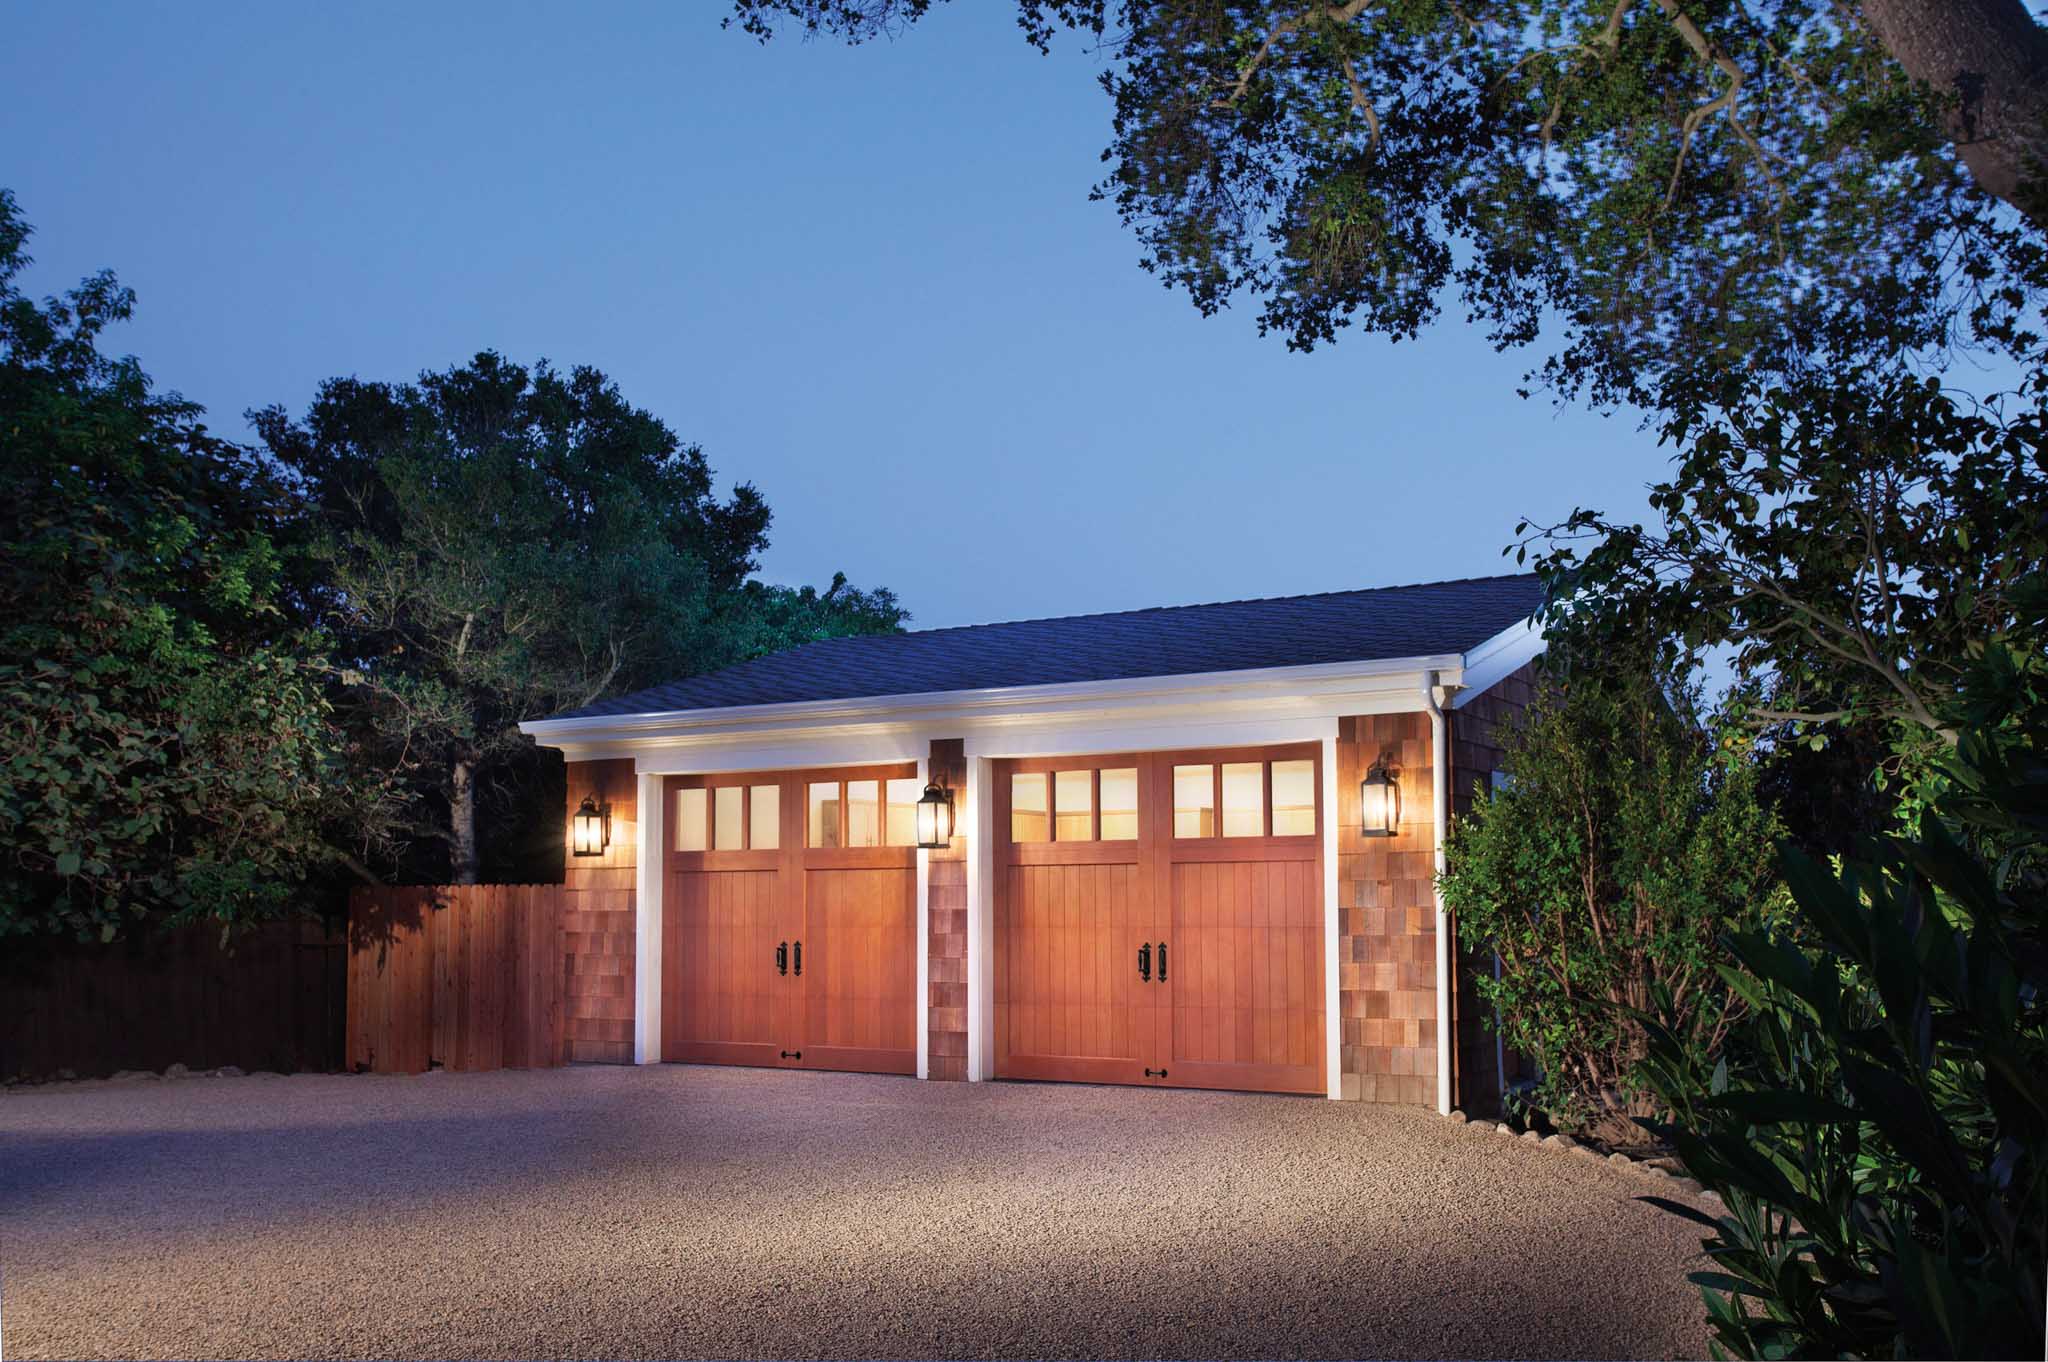 8x7 clear wood carriage house garage doors with glass